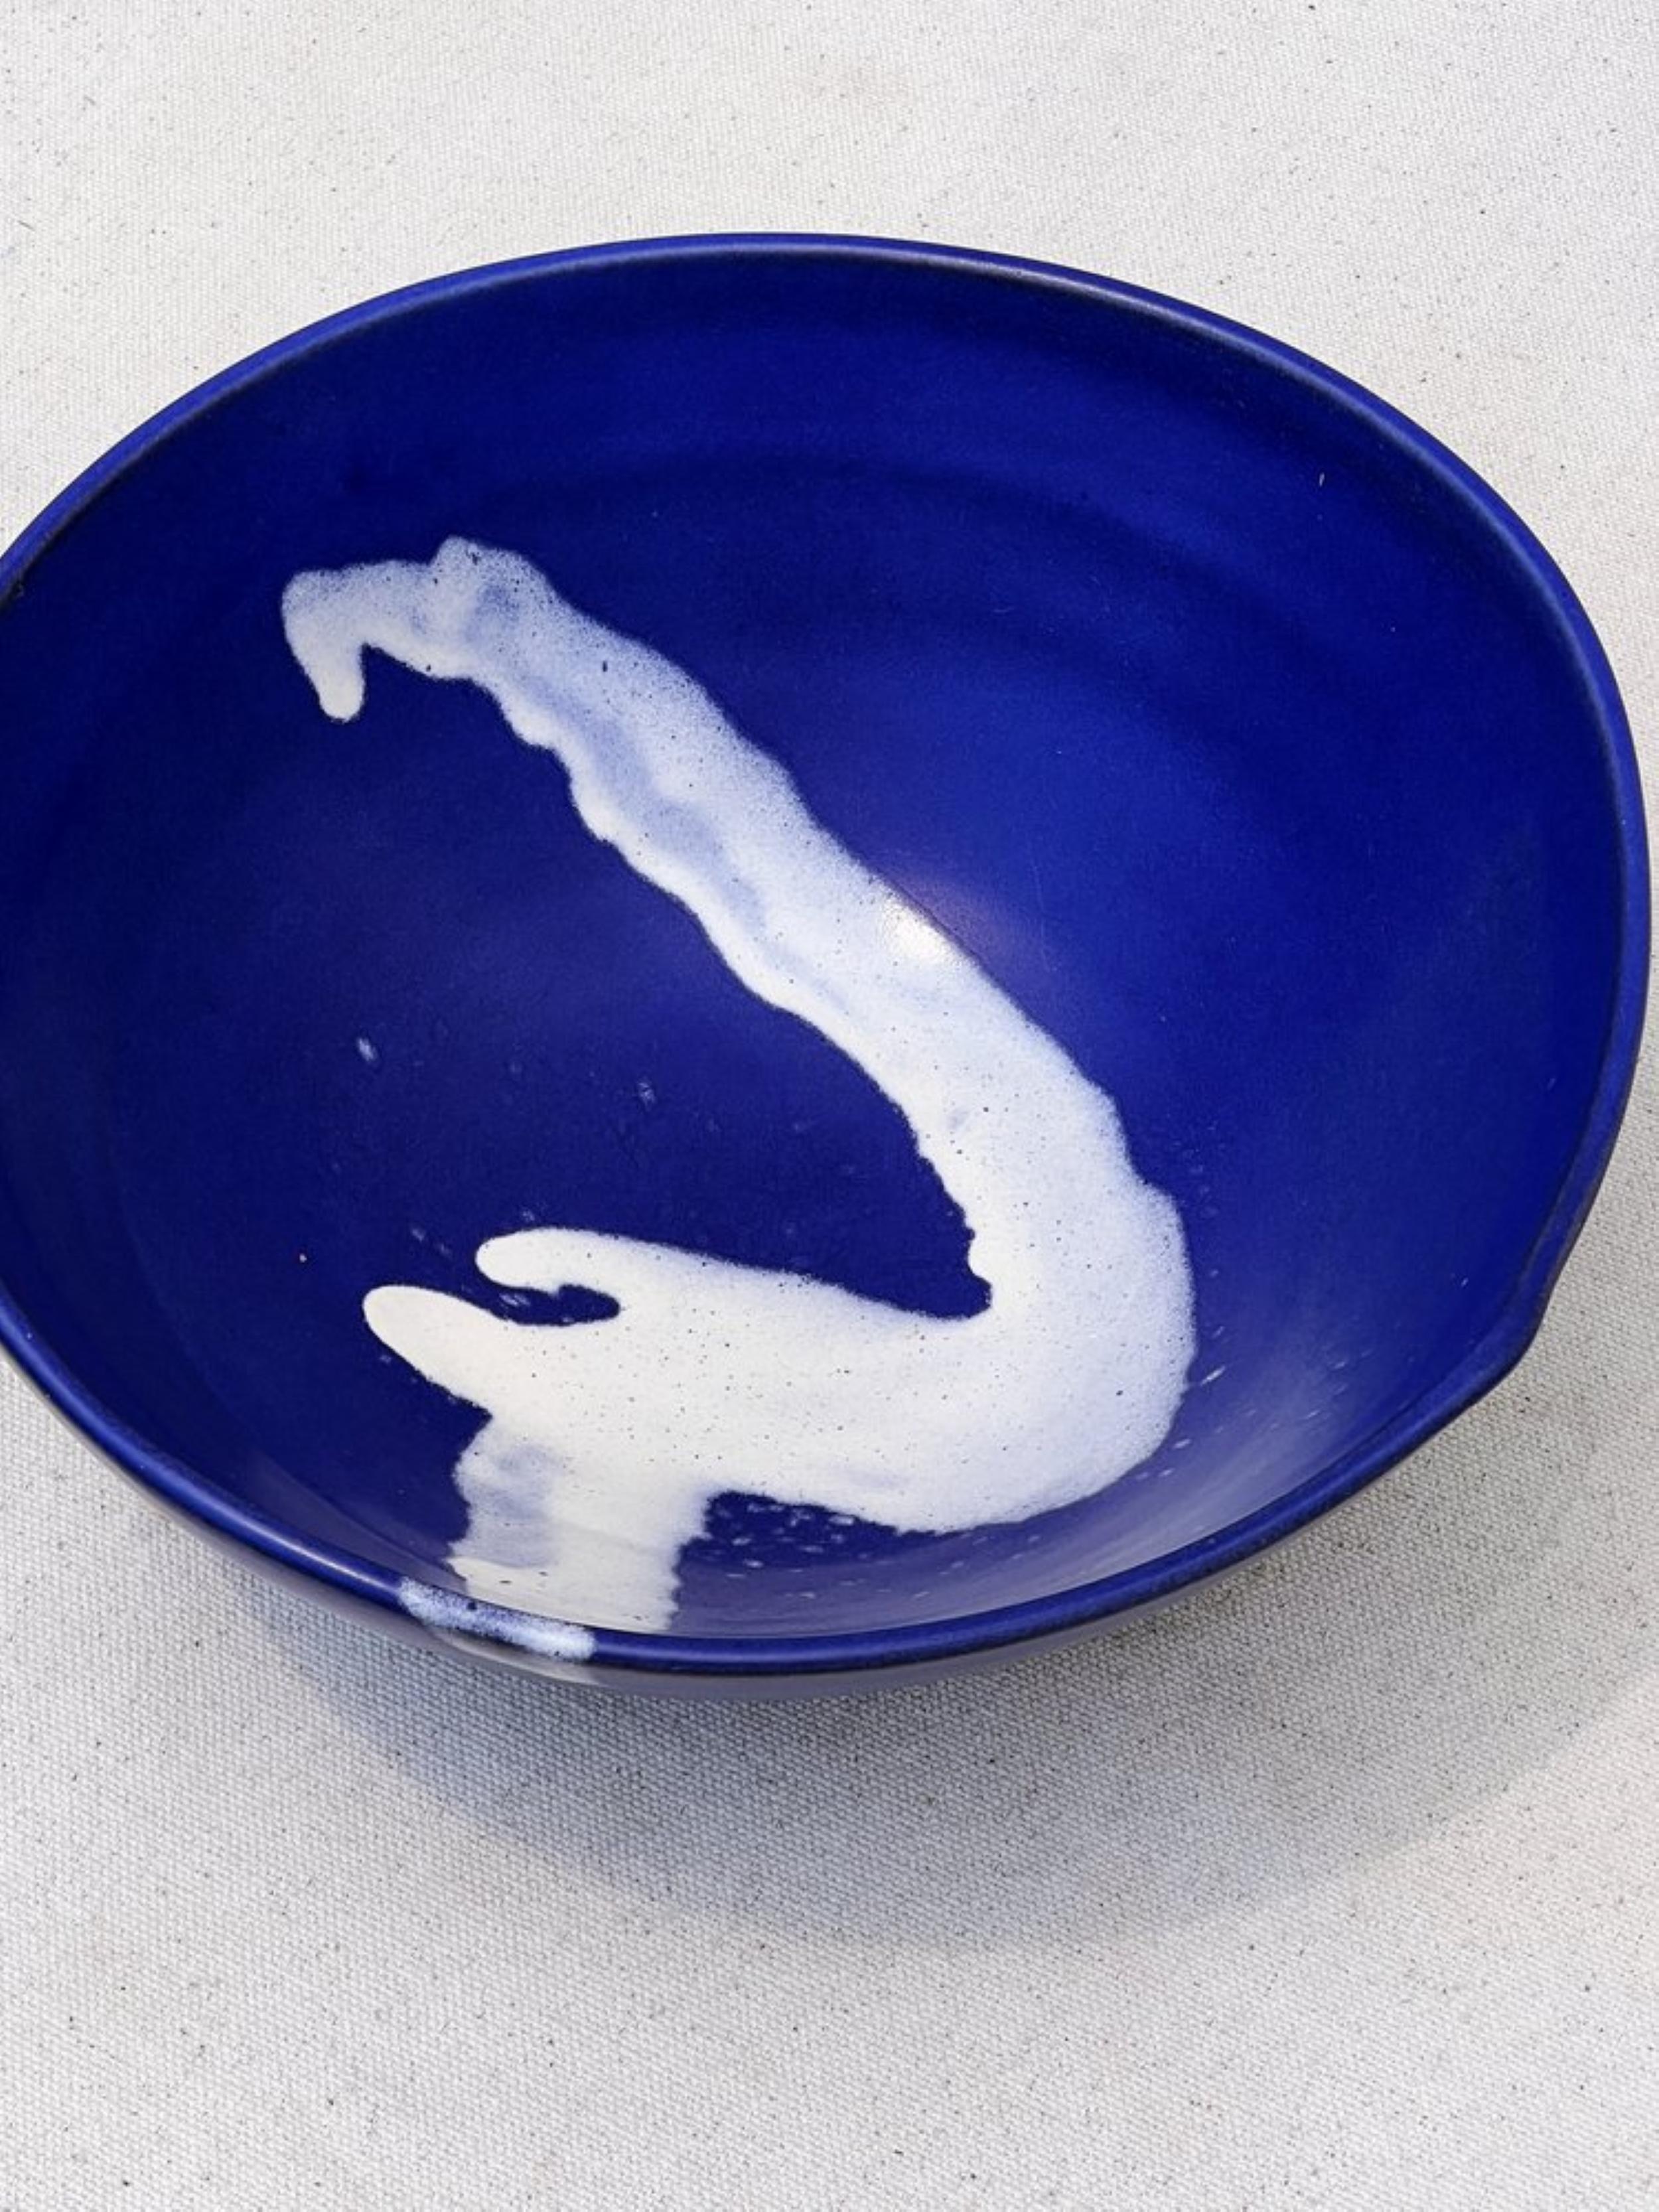 Elevate Your Decor with the Exquisite Blue and White Ceramic Bowl (Signed). Its Rich Blue Coloring, Delicate White Patterns, and Raw Terracotta Base Make It a Captivating Accent or Decorative Piece for Shelves and Tabletops. The Bowl's Unique